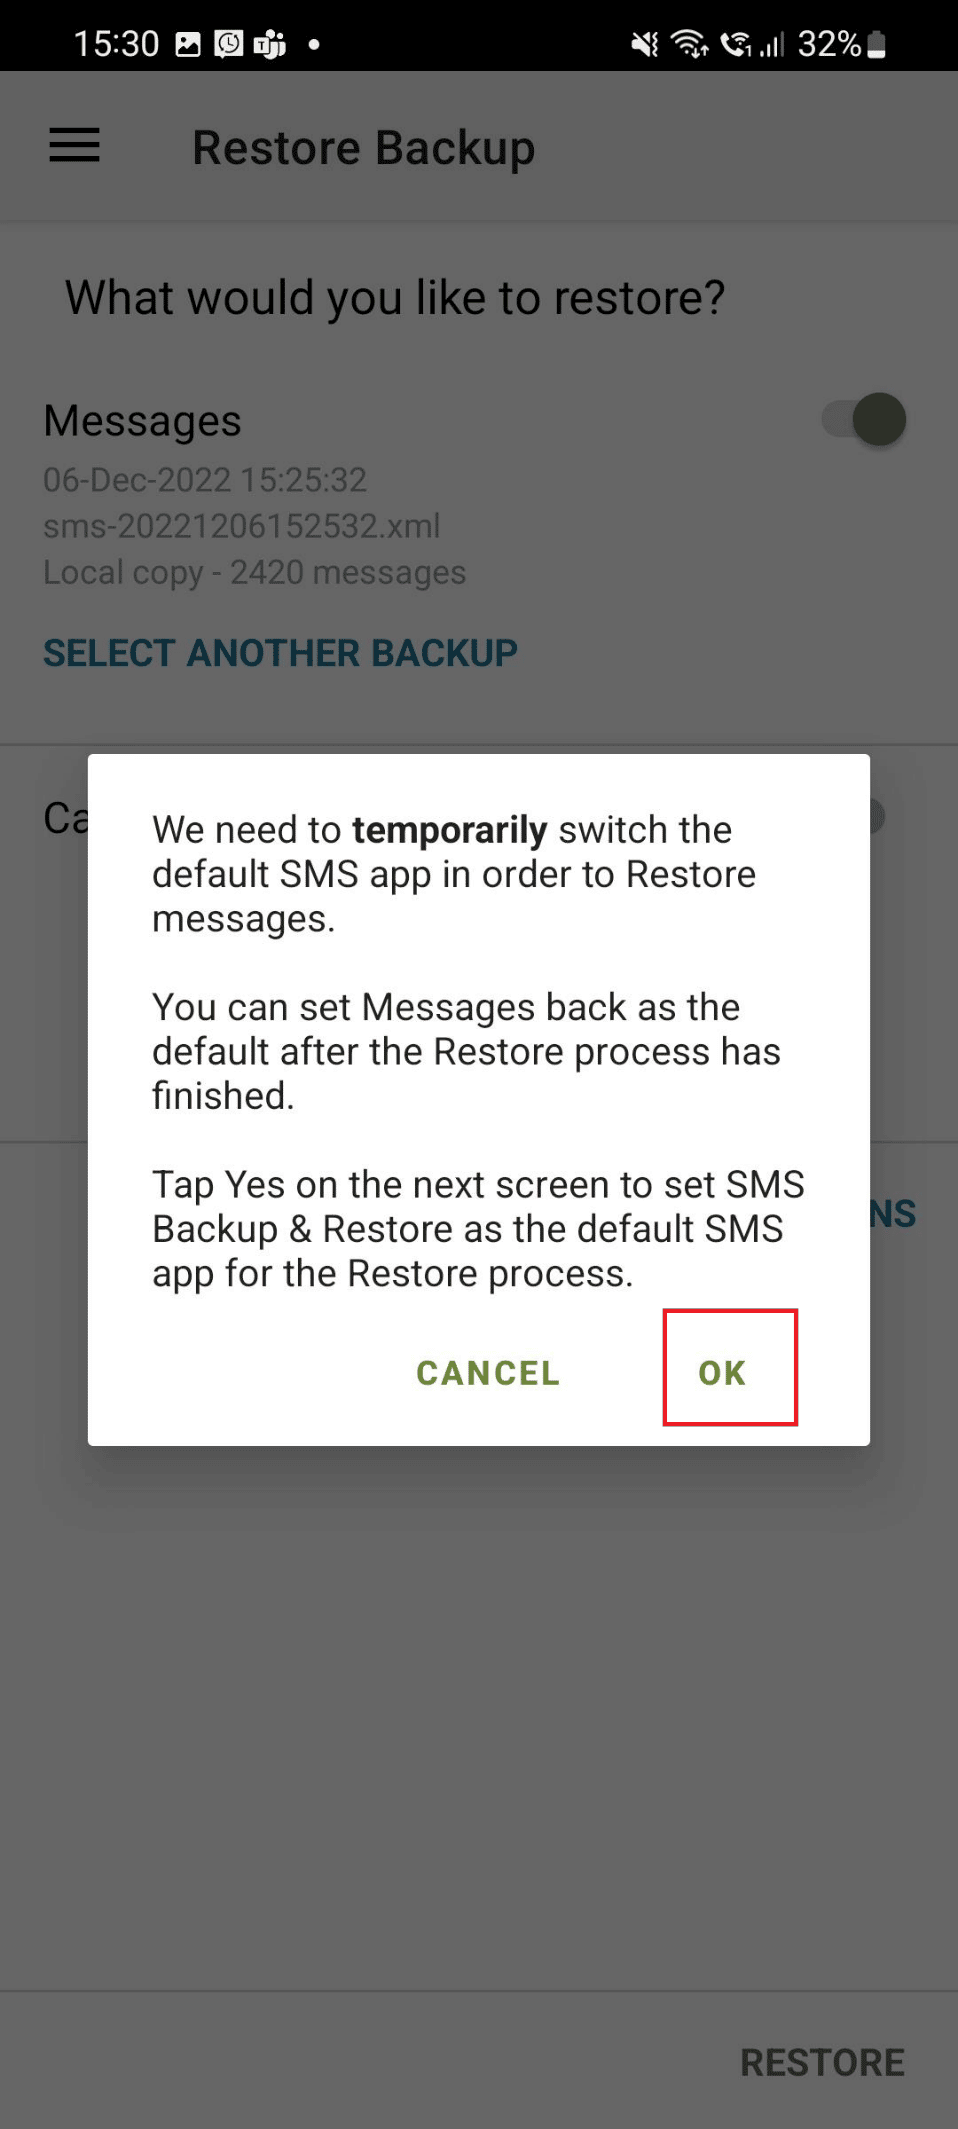 Tap on the OK option